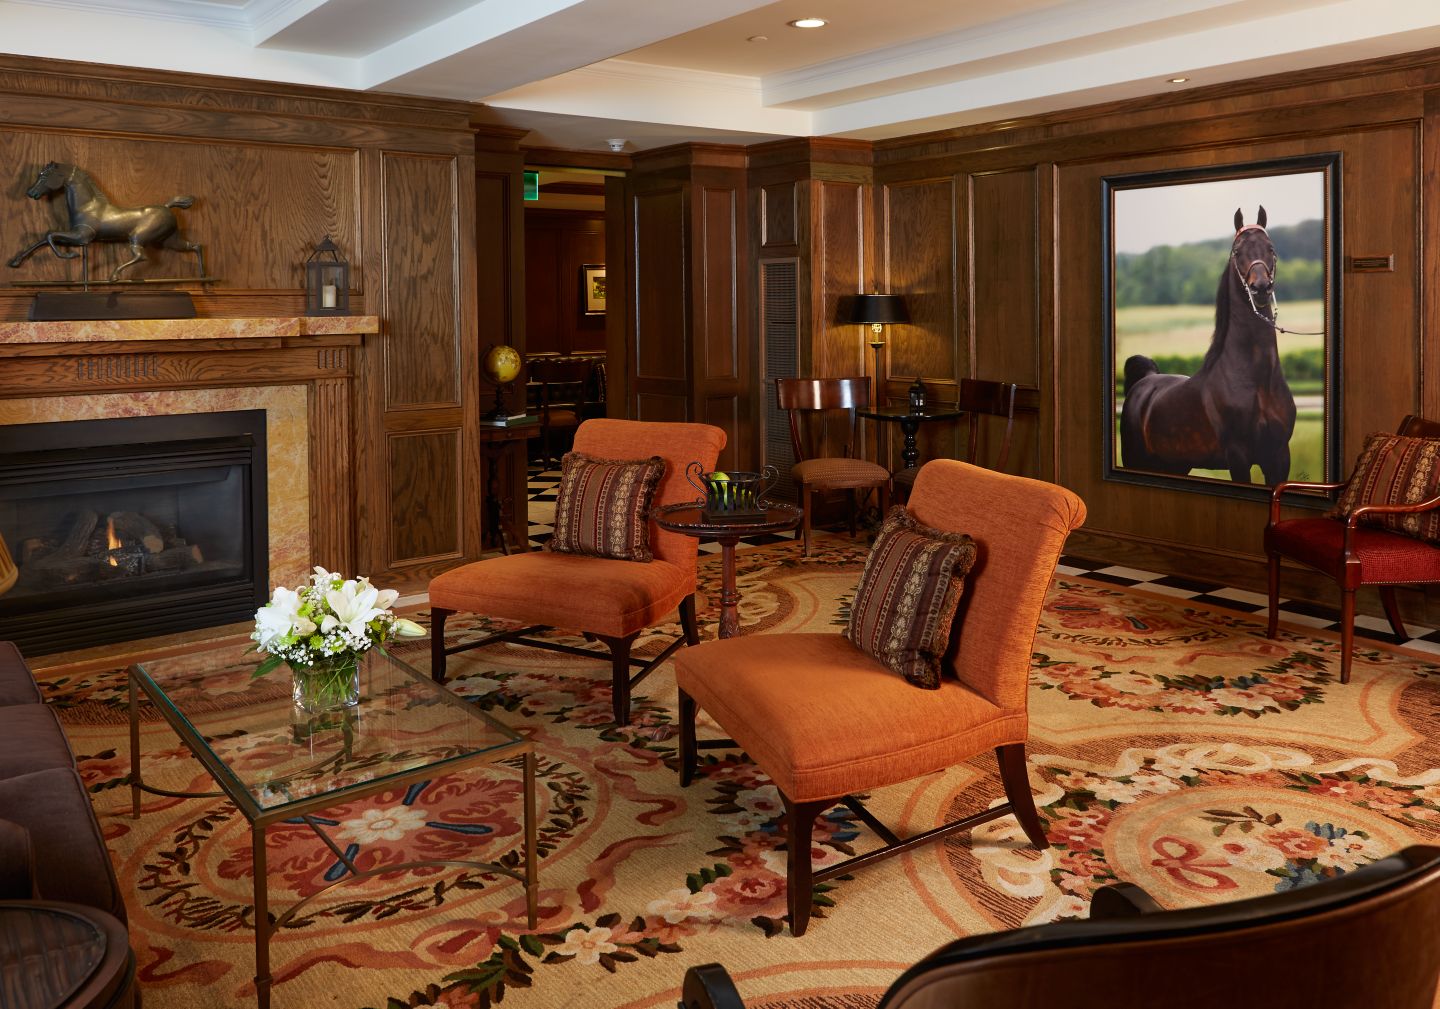 The interior of the American Club with a fireplace and a portrait of a horse on the wall